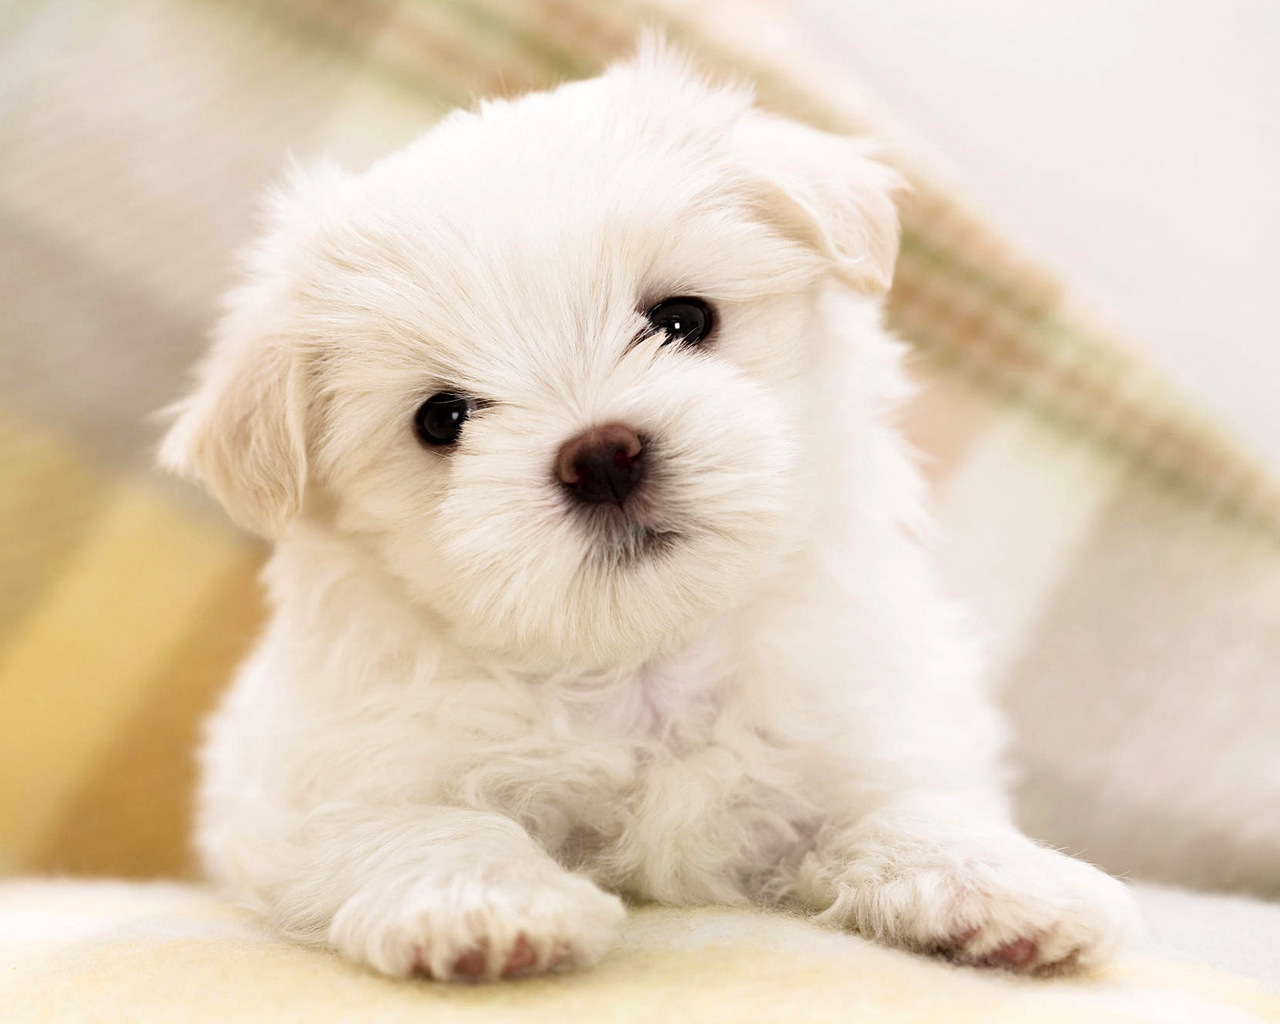 Poodle Puppies Wallpaper Dogs Puppy